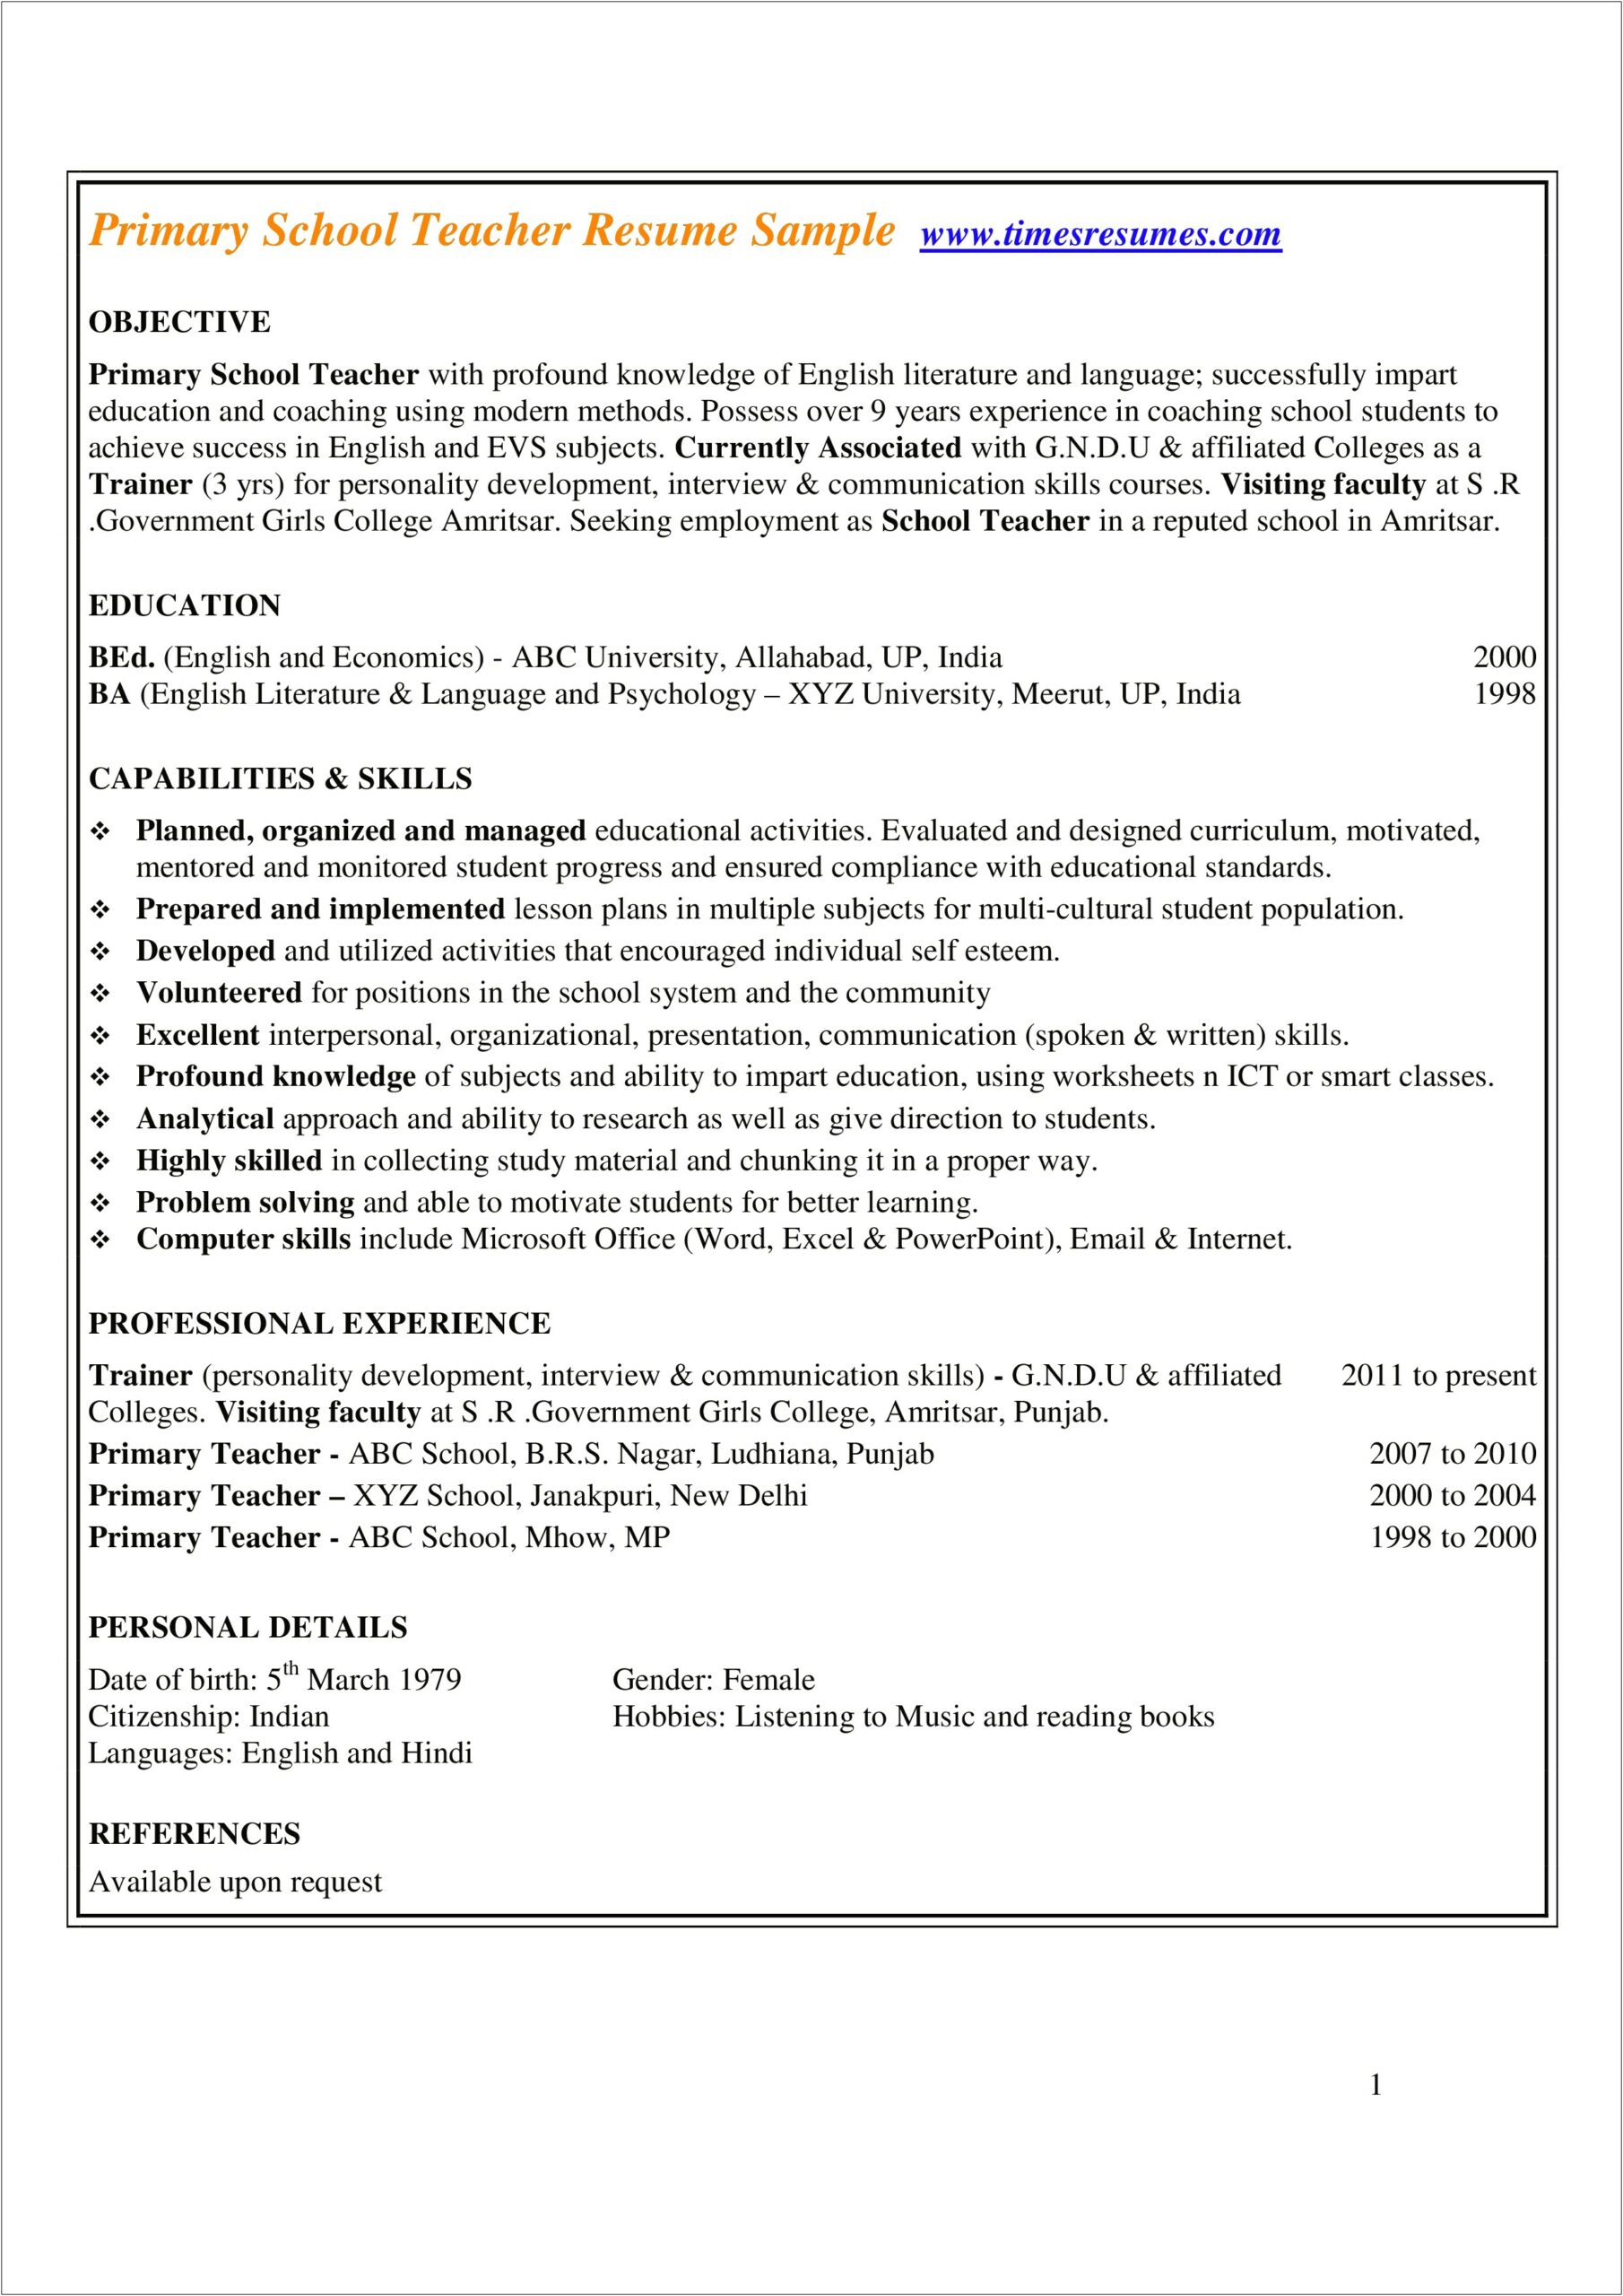 Download Sample Resumes For Teachers